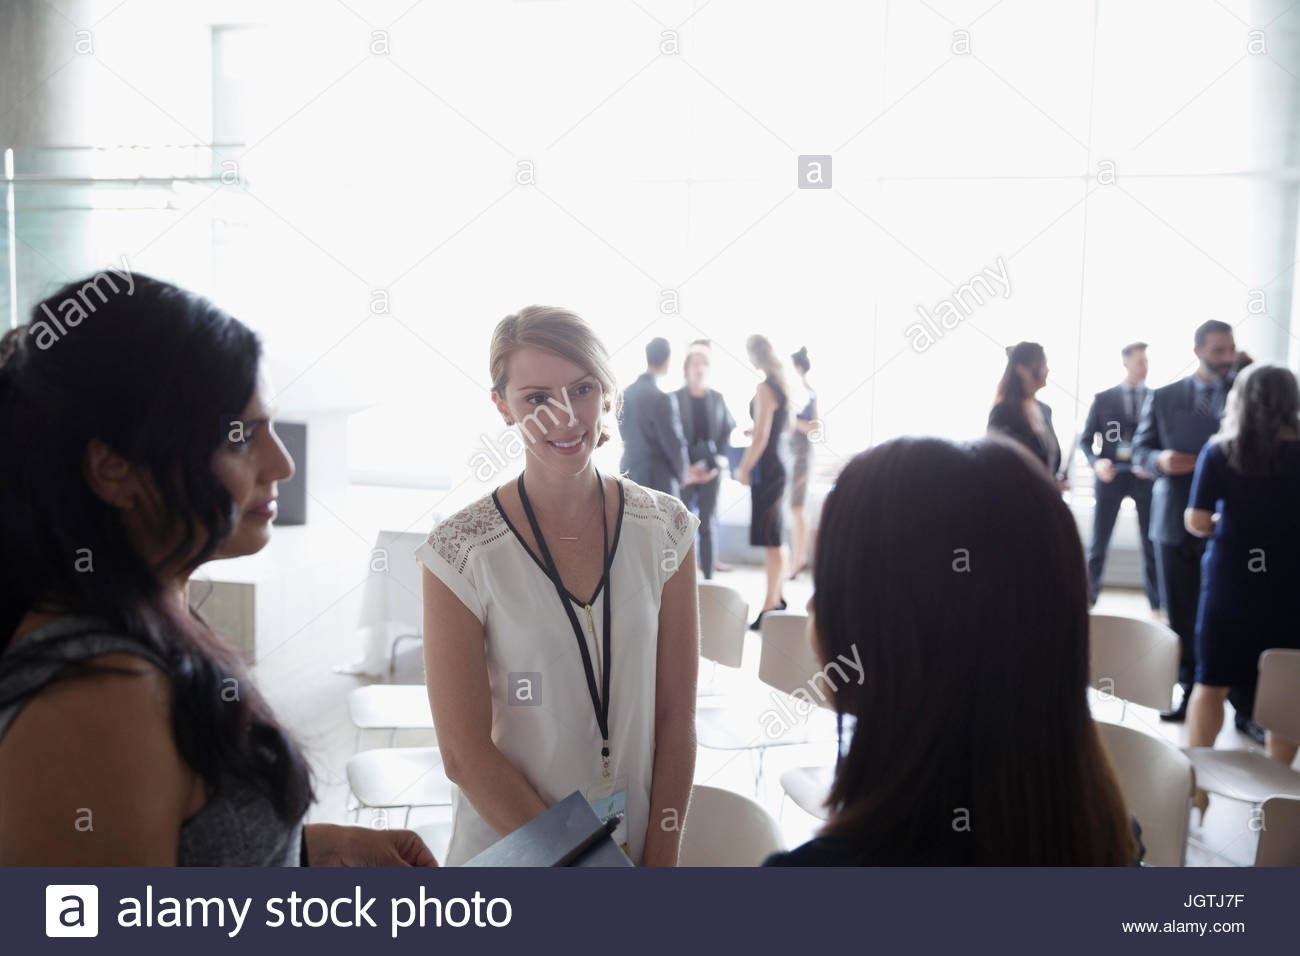 Businesswomen talking, networking at conference Stock Photo